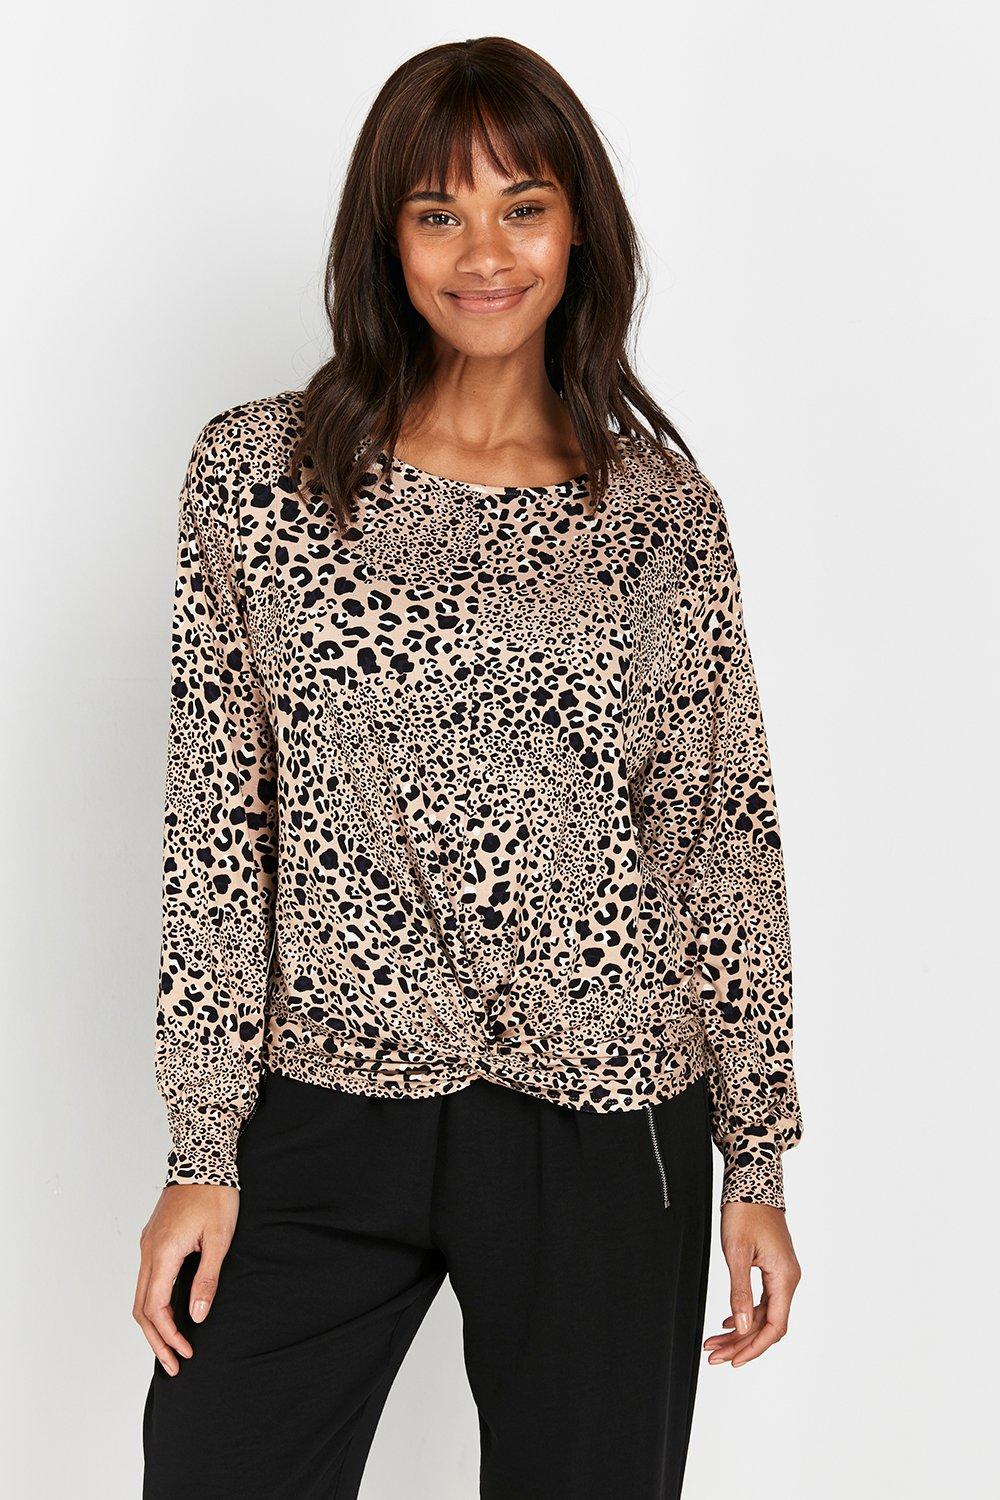 Animal Print Is Still A Must-Have, And This Versatile Top Makes Wearing The Trend Easy. A Chic Neutral Hue Keeps This Easy To Pair, Whilst A Relaxed Fit And Knot Front Hem Mean This Is Sure To Flatter. Wear With Skinny Jeans And Ankle Boots For Easy Every